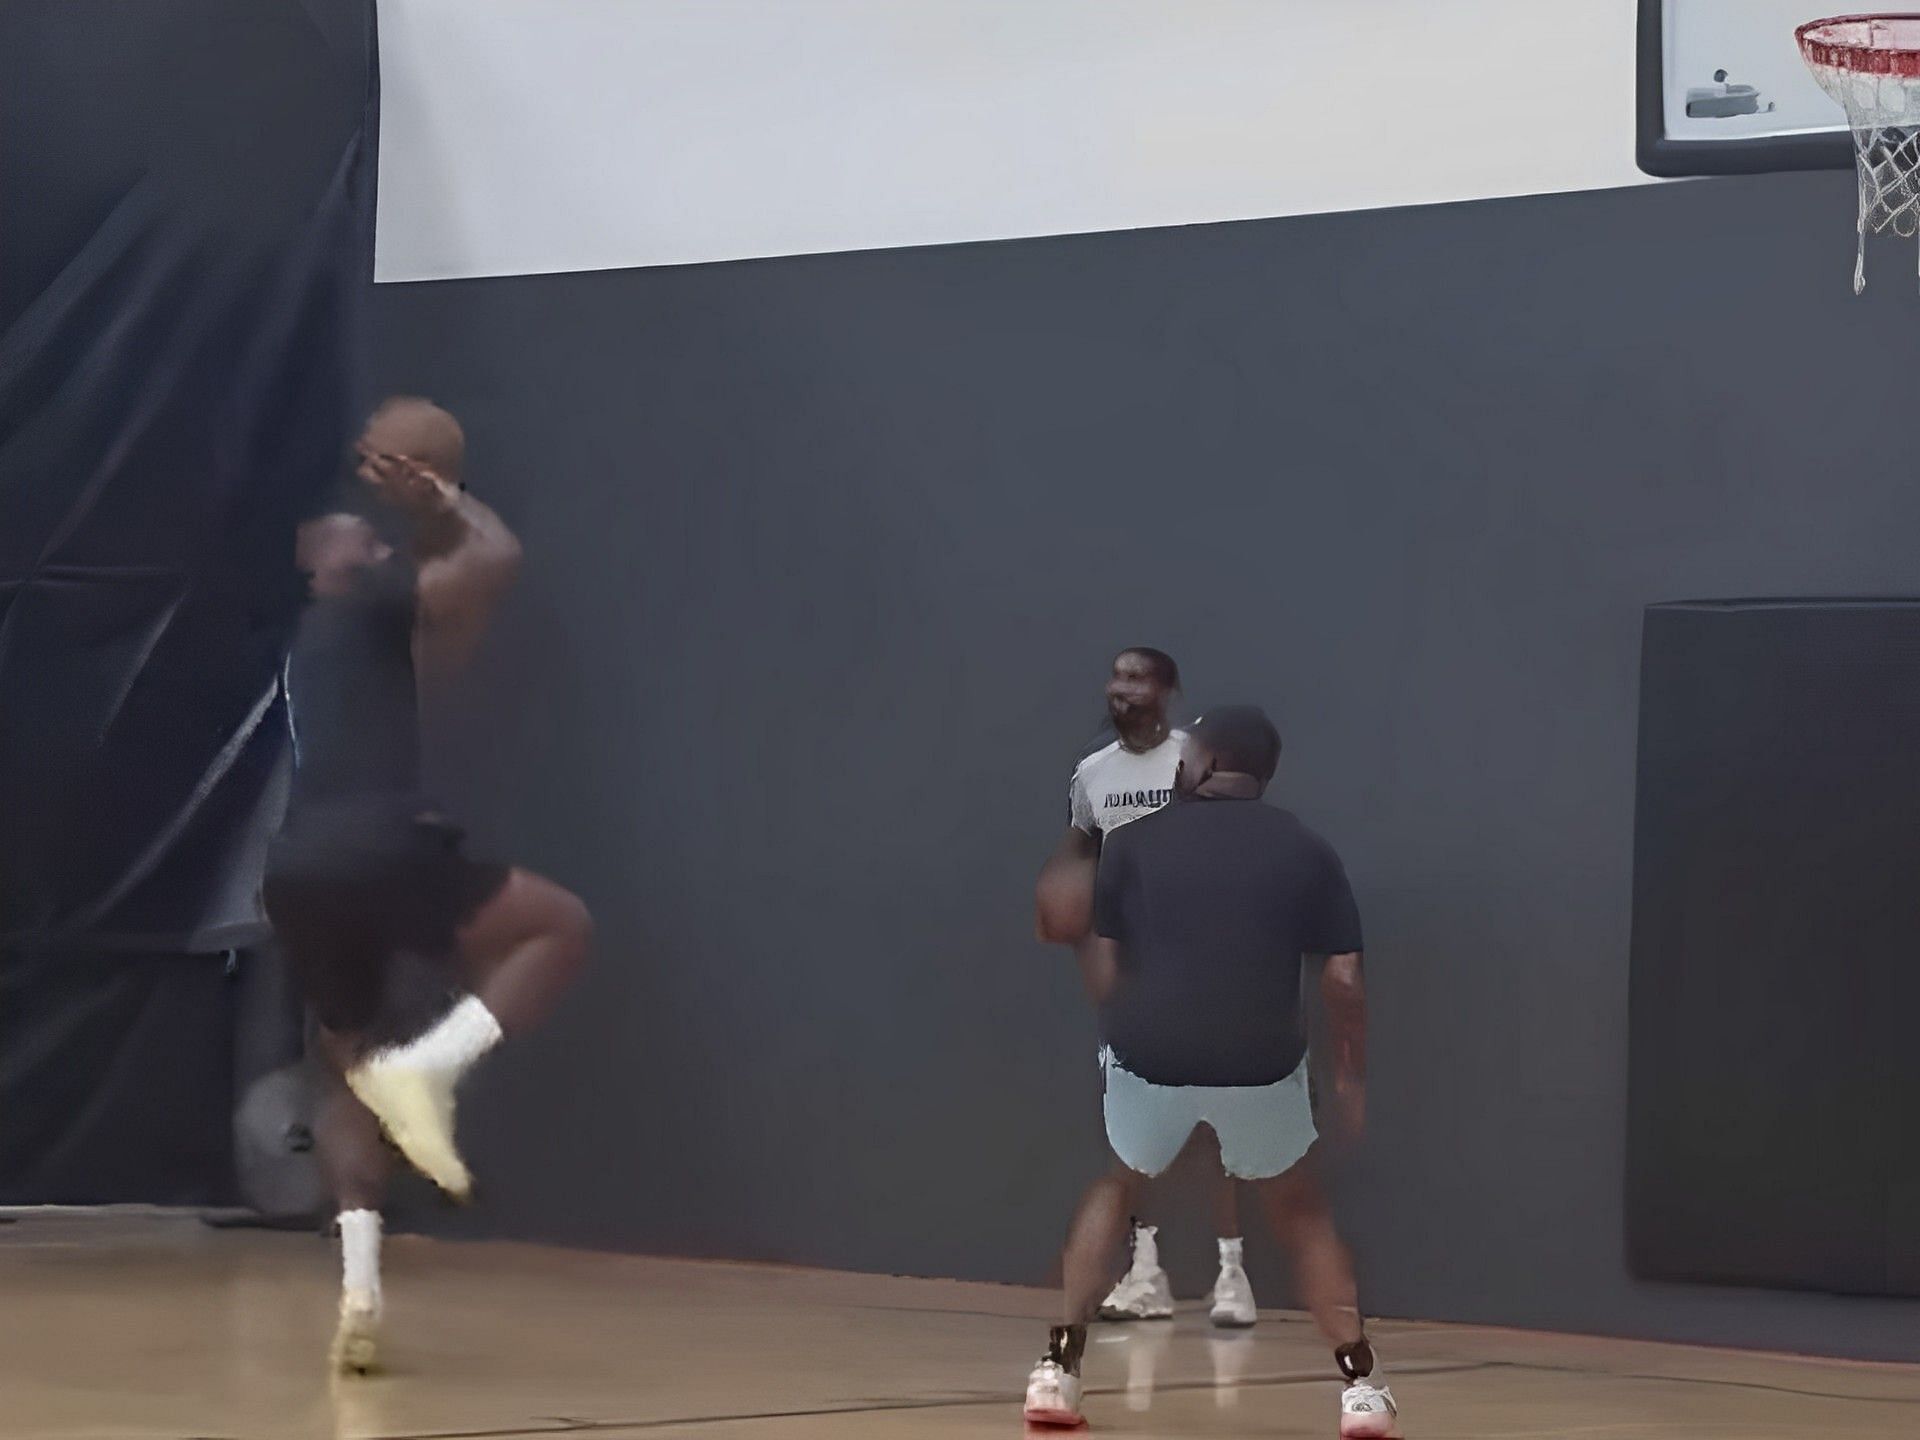 LA Lakers star forward LeBron James participating in a recent workout